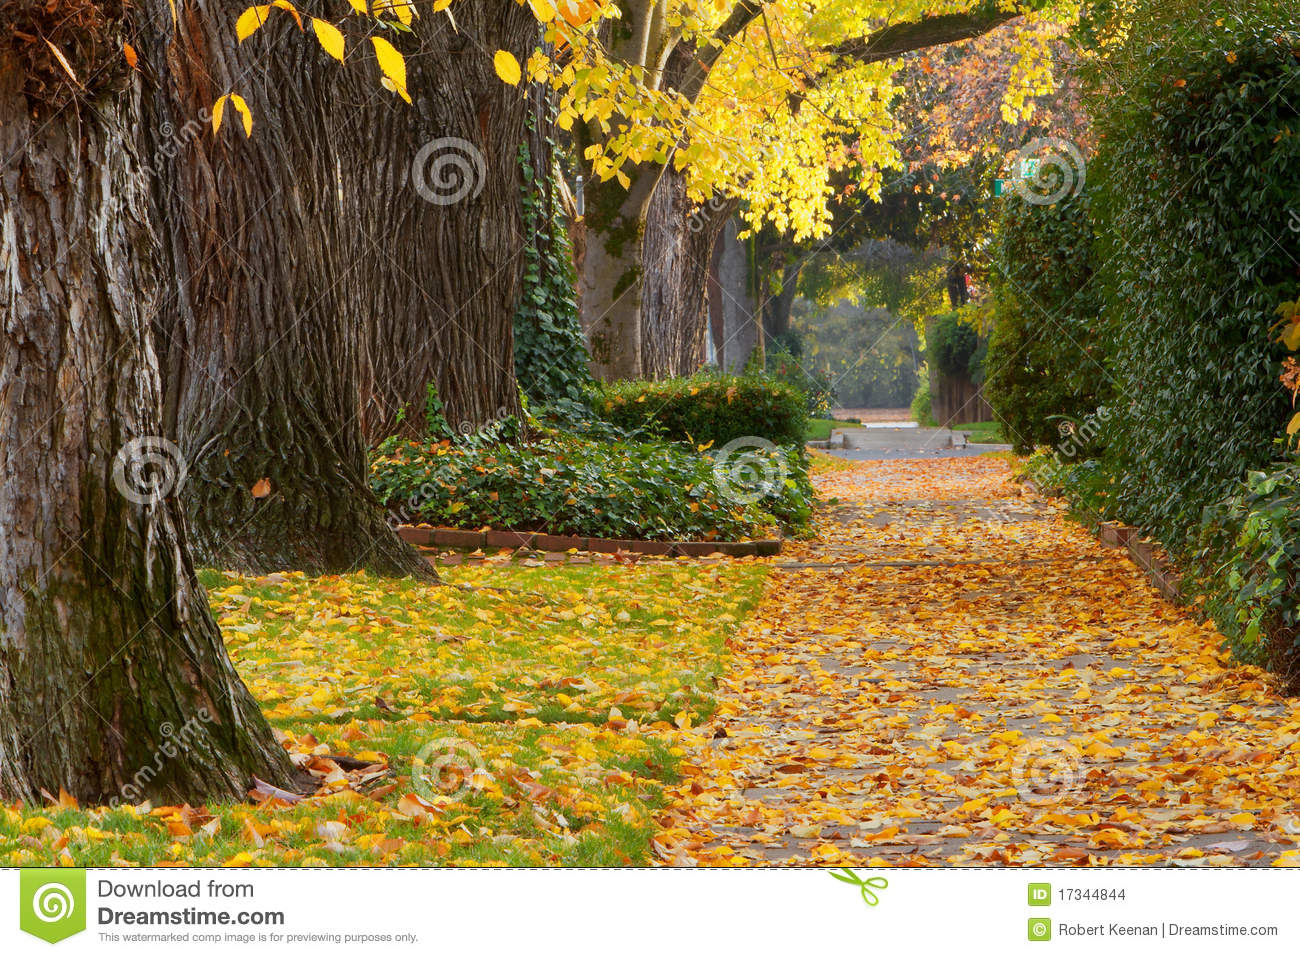 Neighborhood Sidewalk In Autumn With Trees And Bushes 